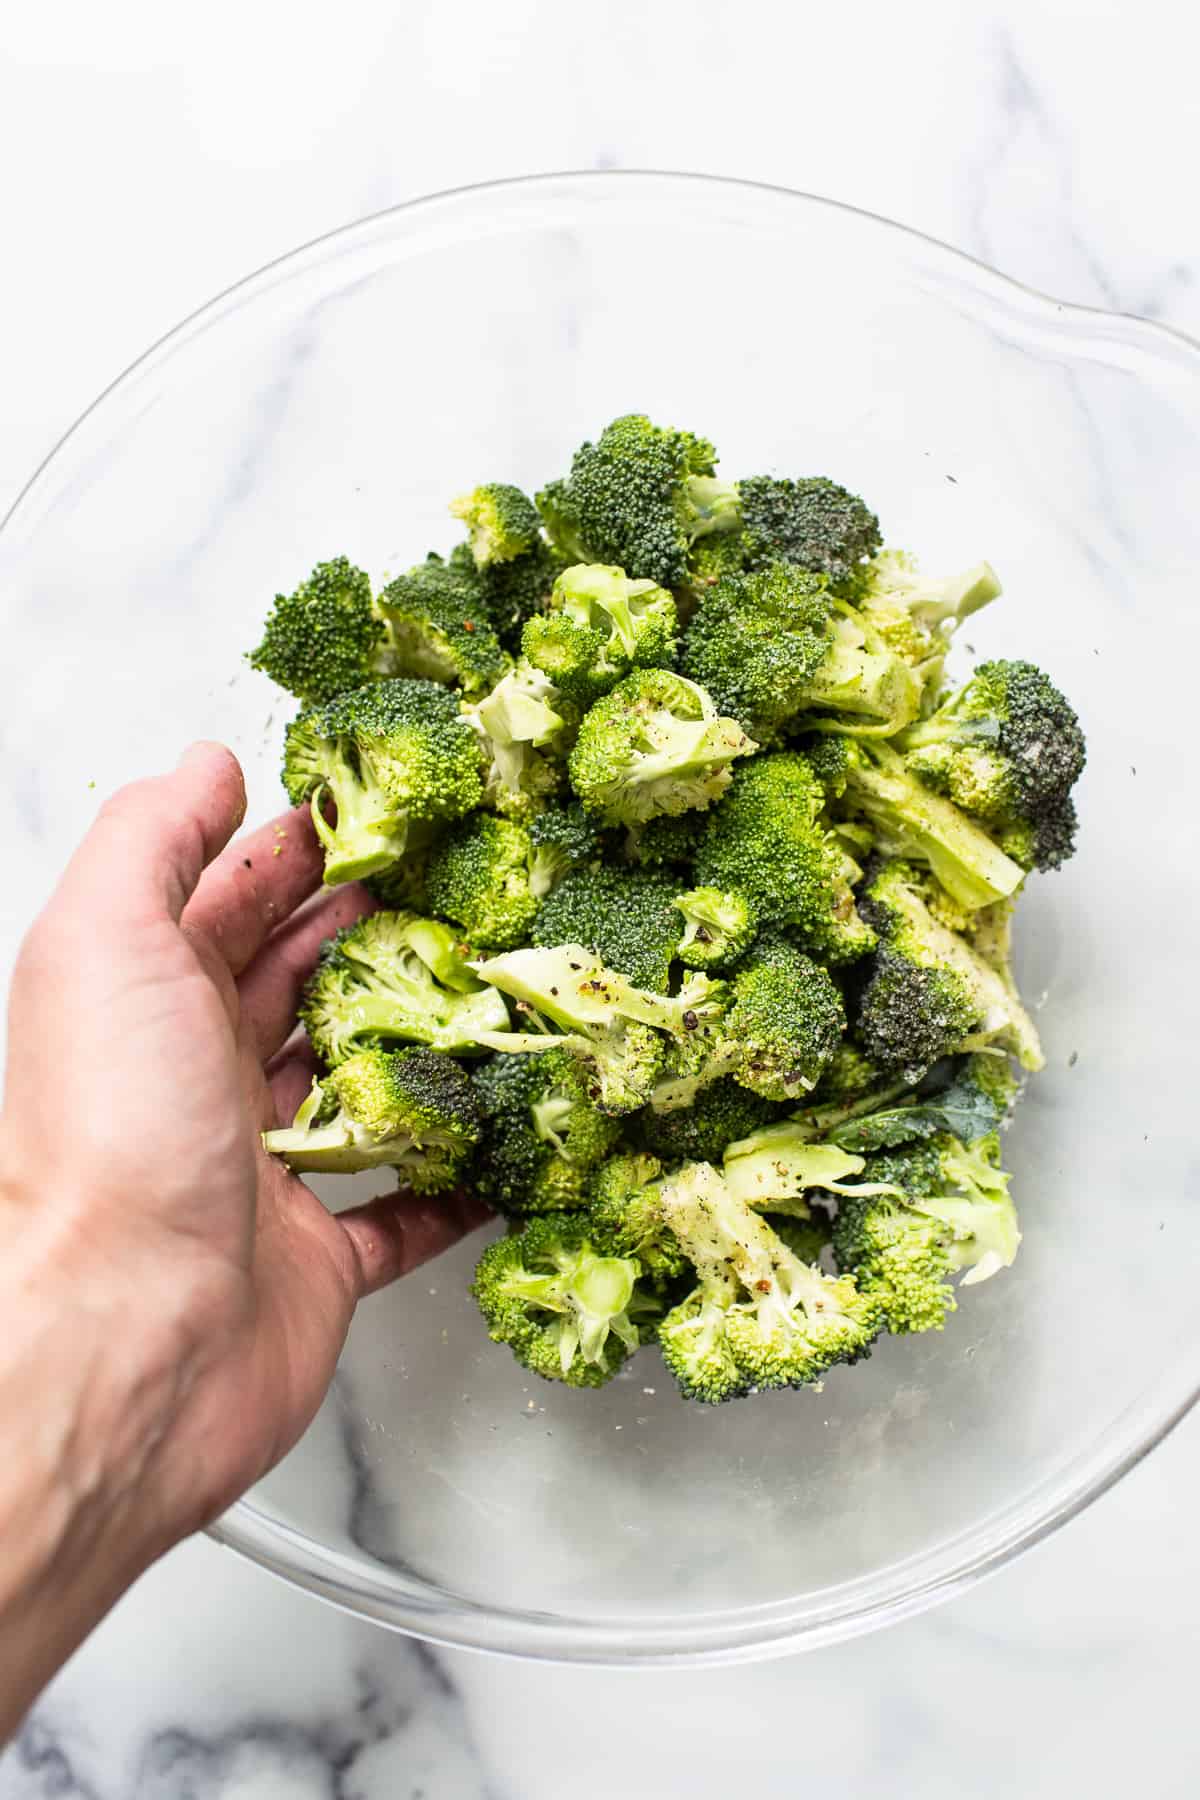 Broccoli florets in a bowl with seasoning.